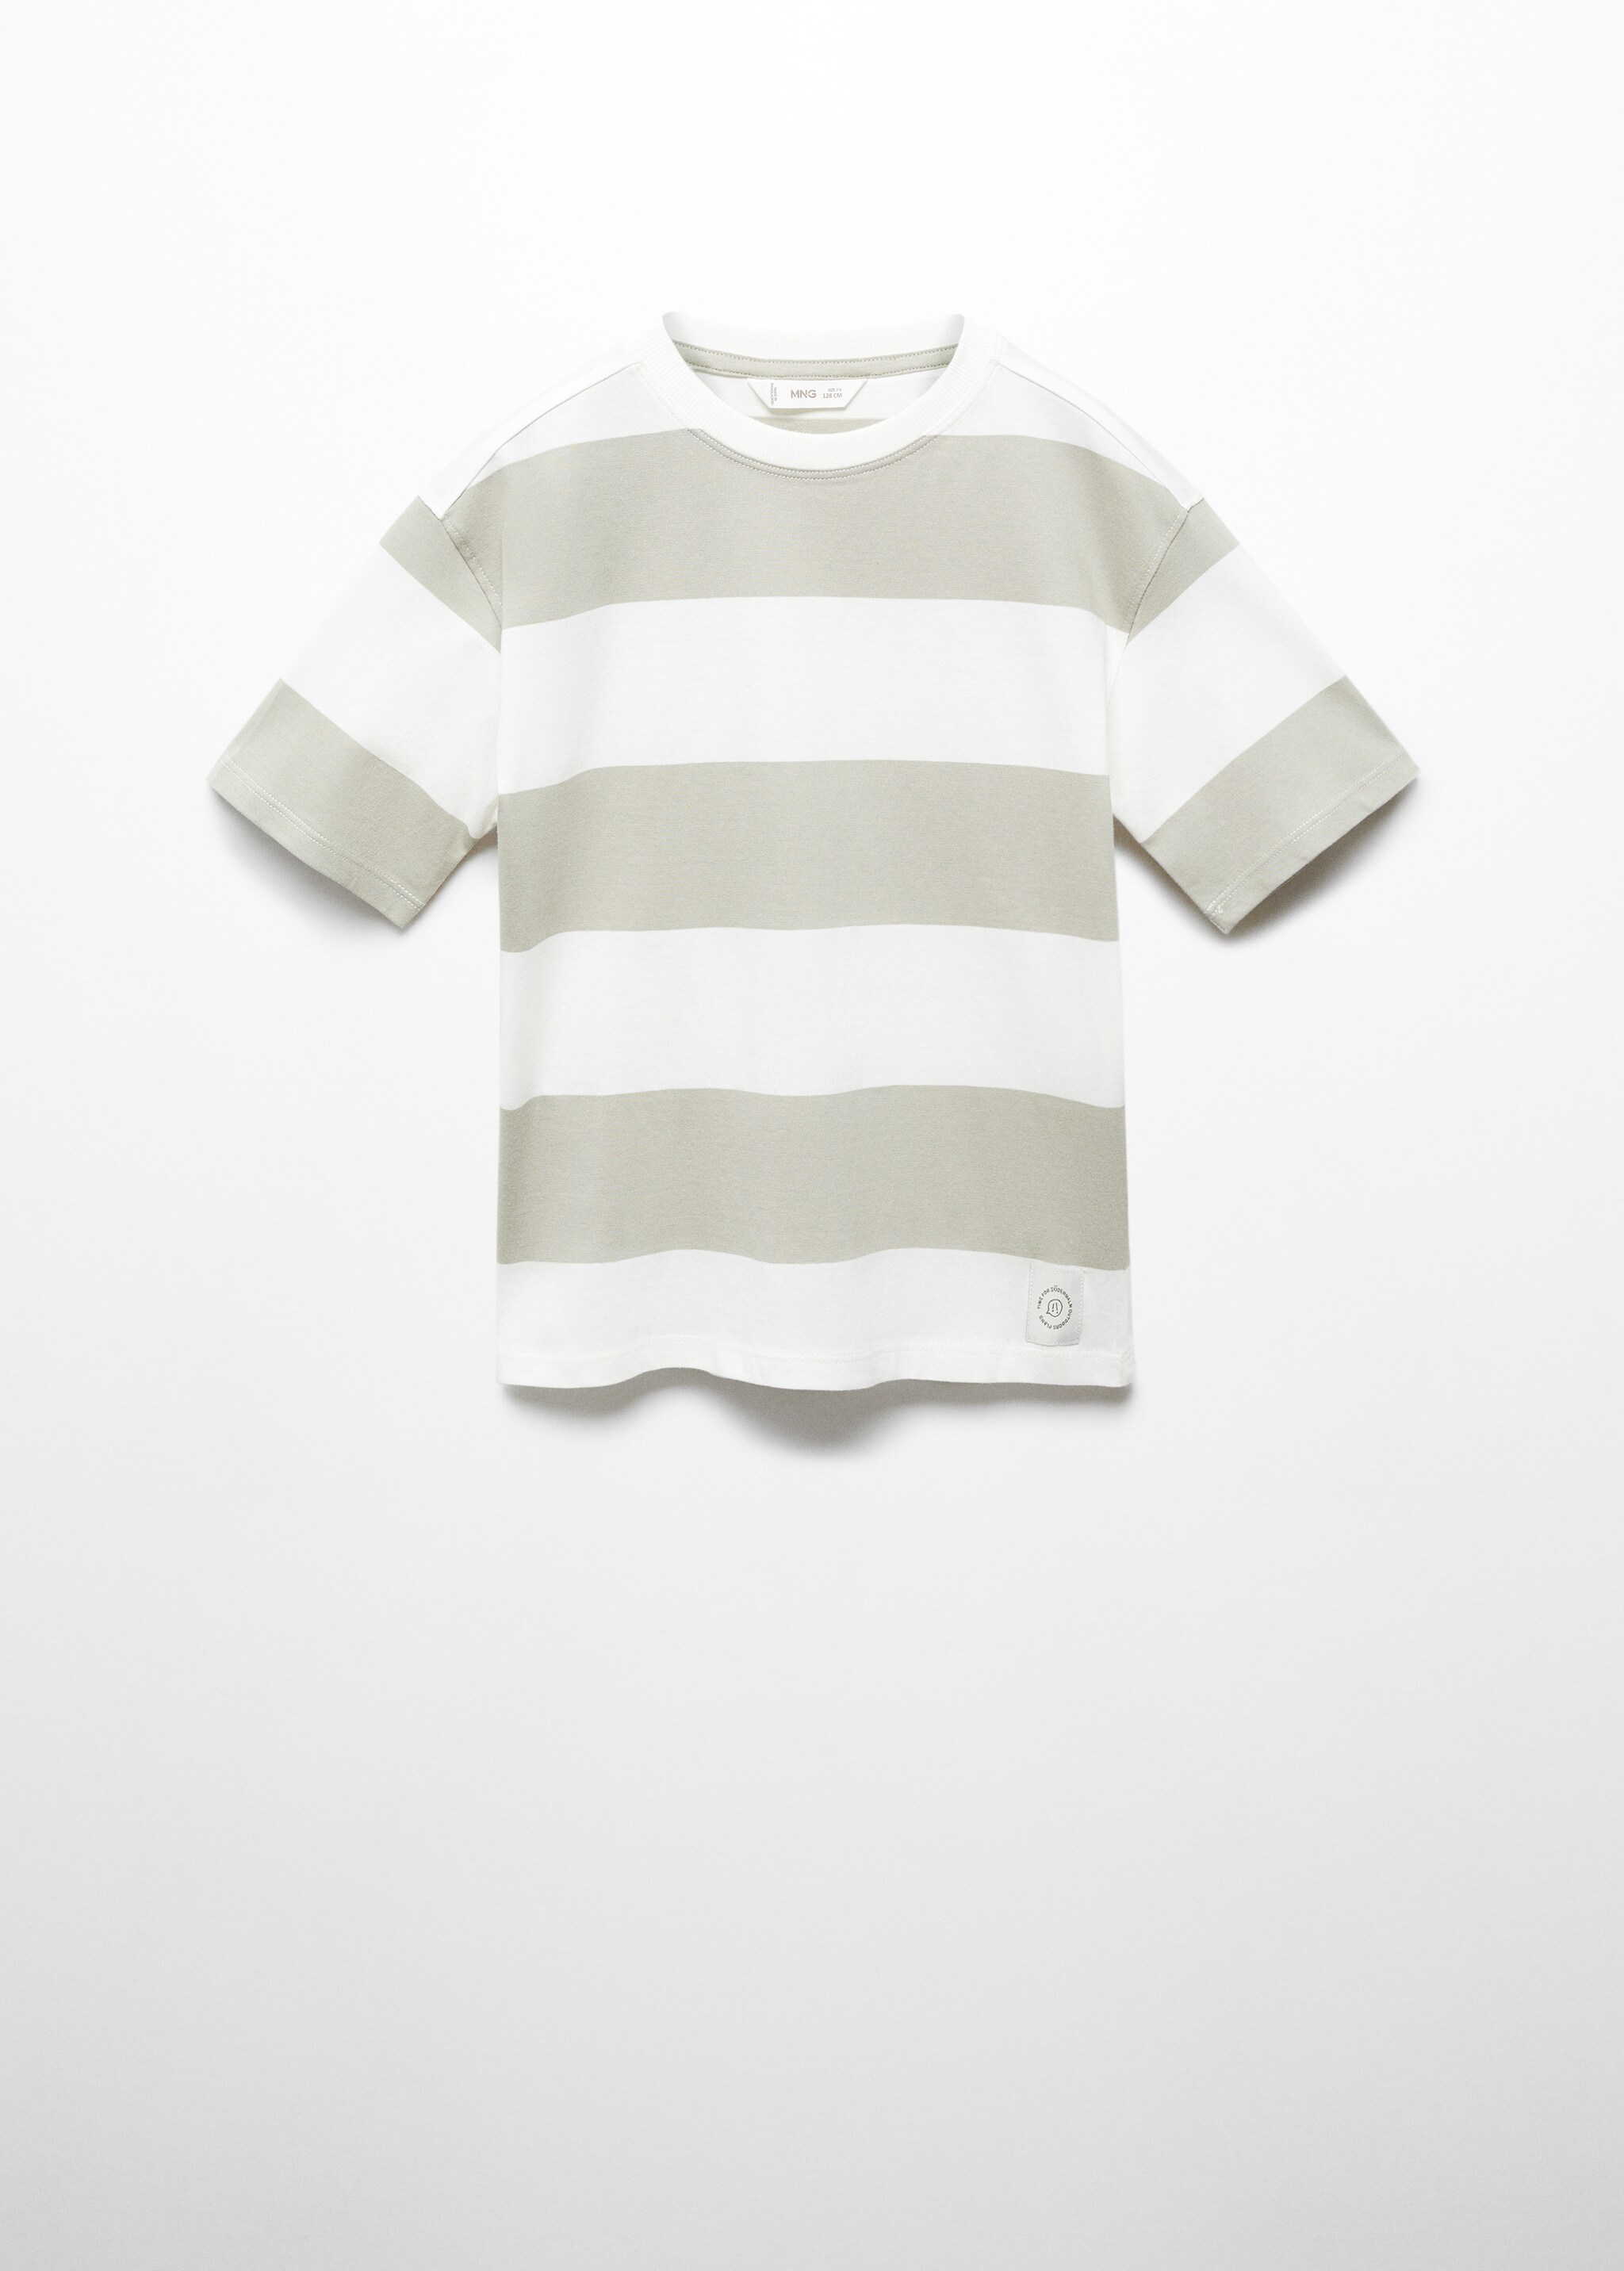 Printed striped T-shirt - Article without model